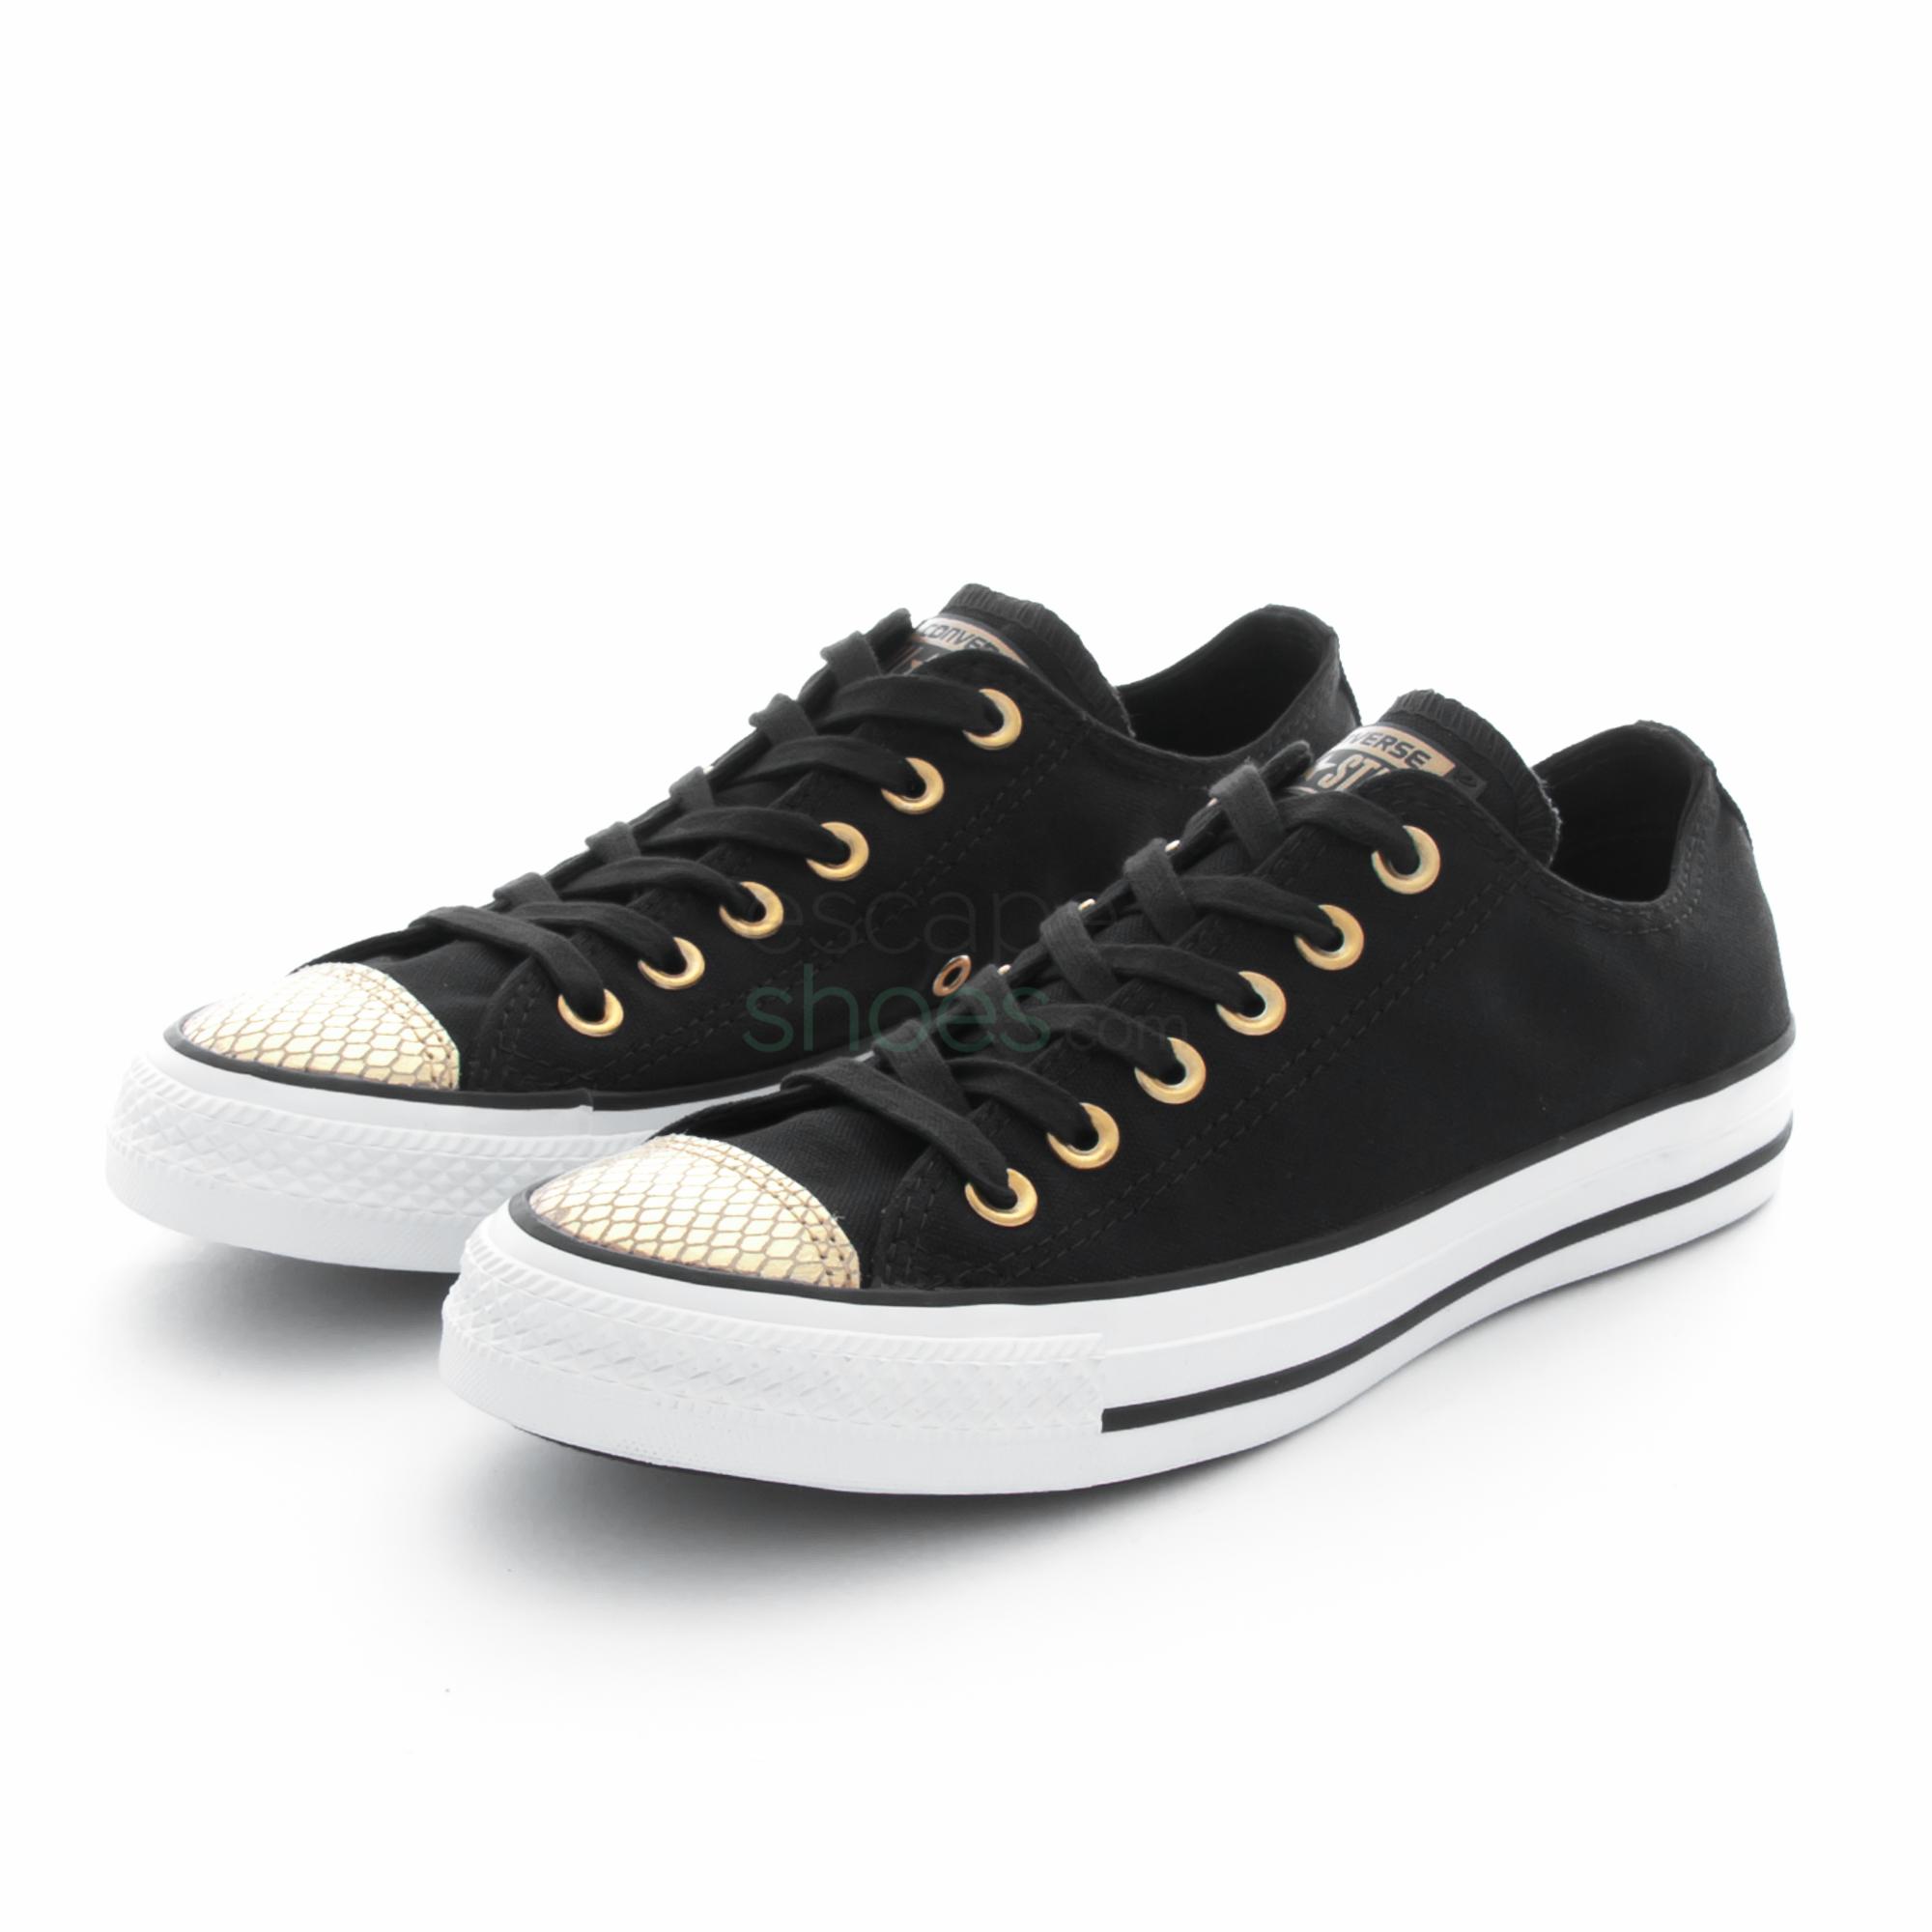 converse all star black and gold